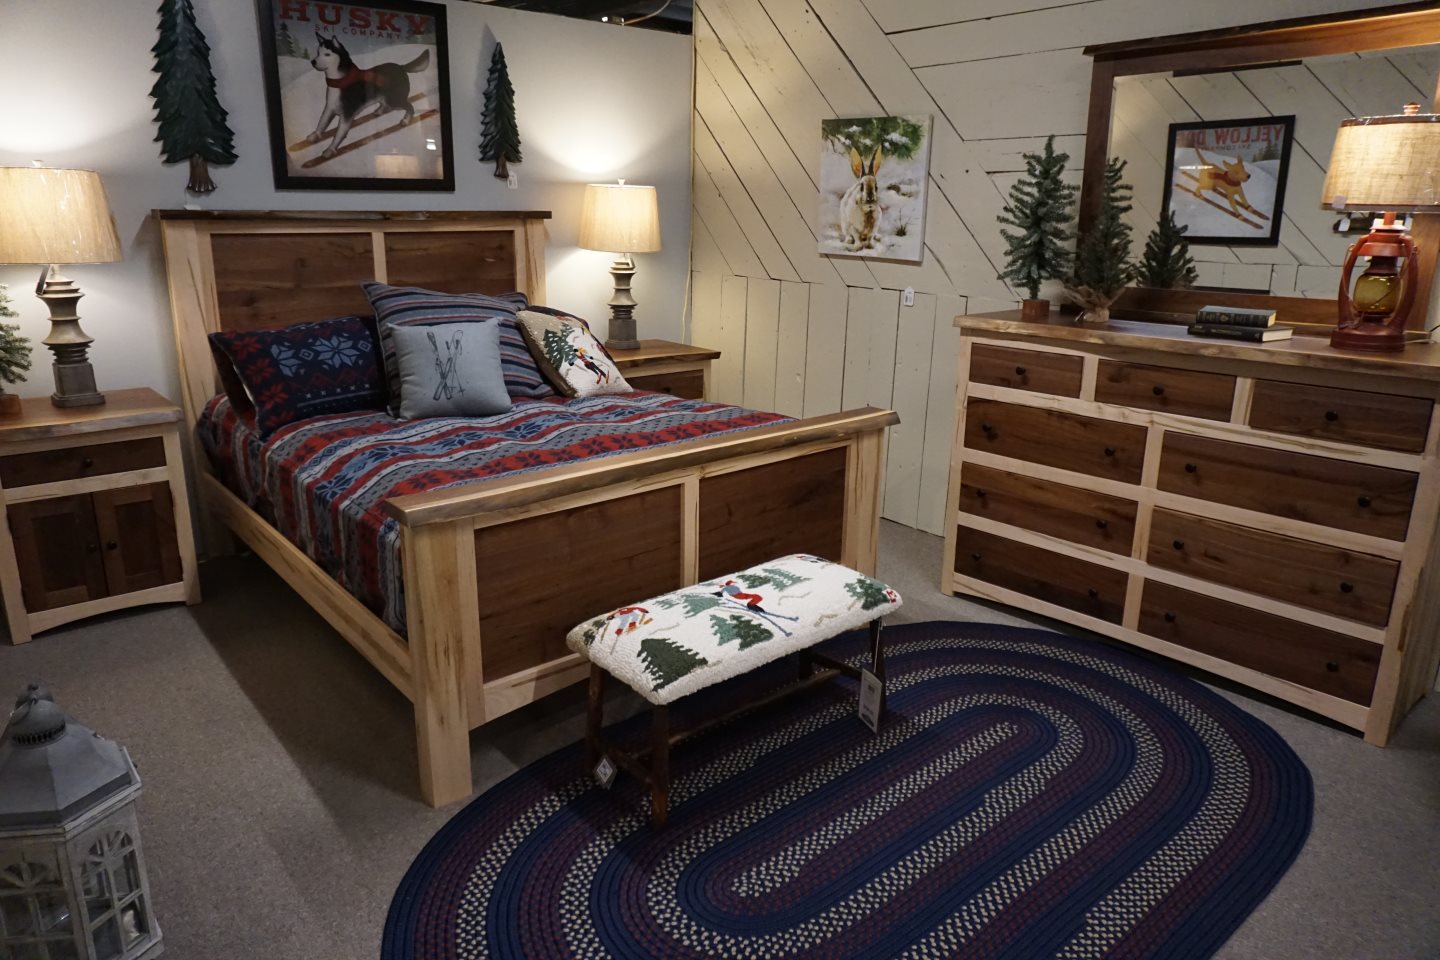 Amish - Hogback - Live Edge Collection Wormy Maple & Walnut Bedroom